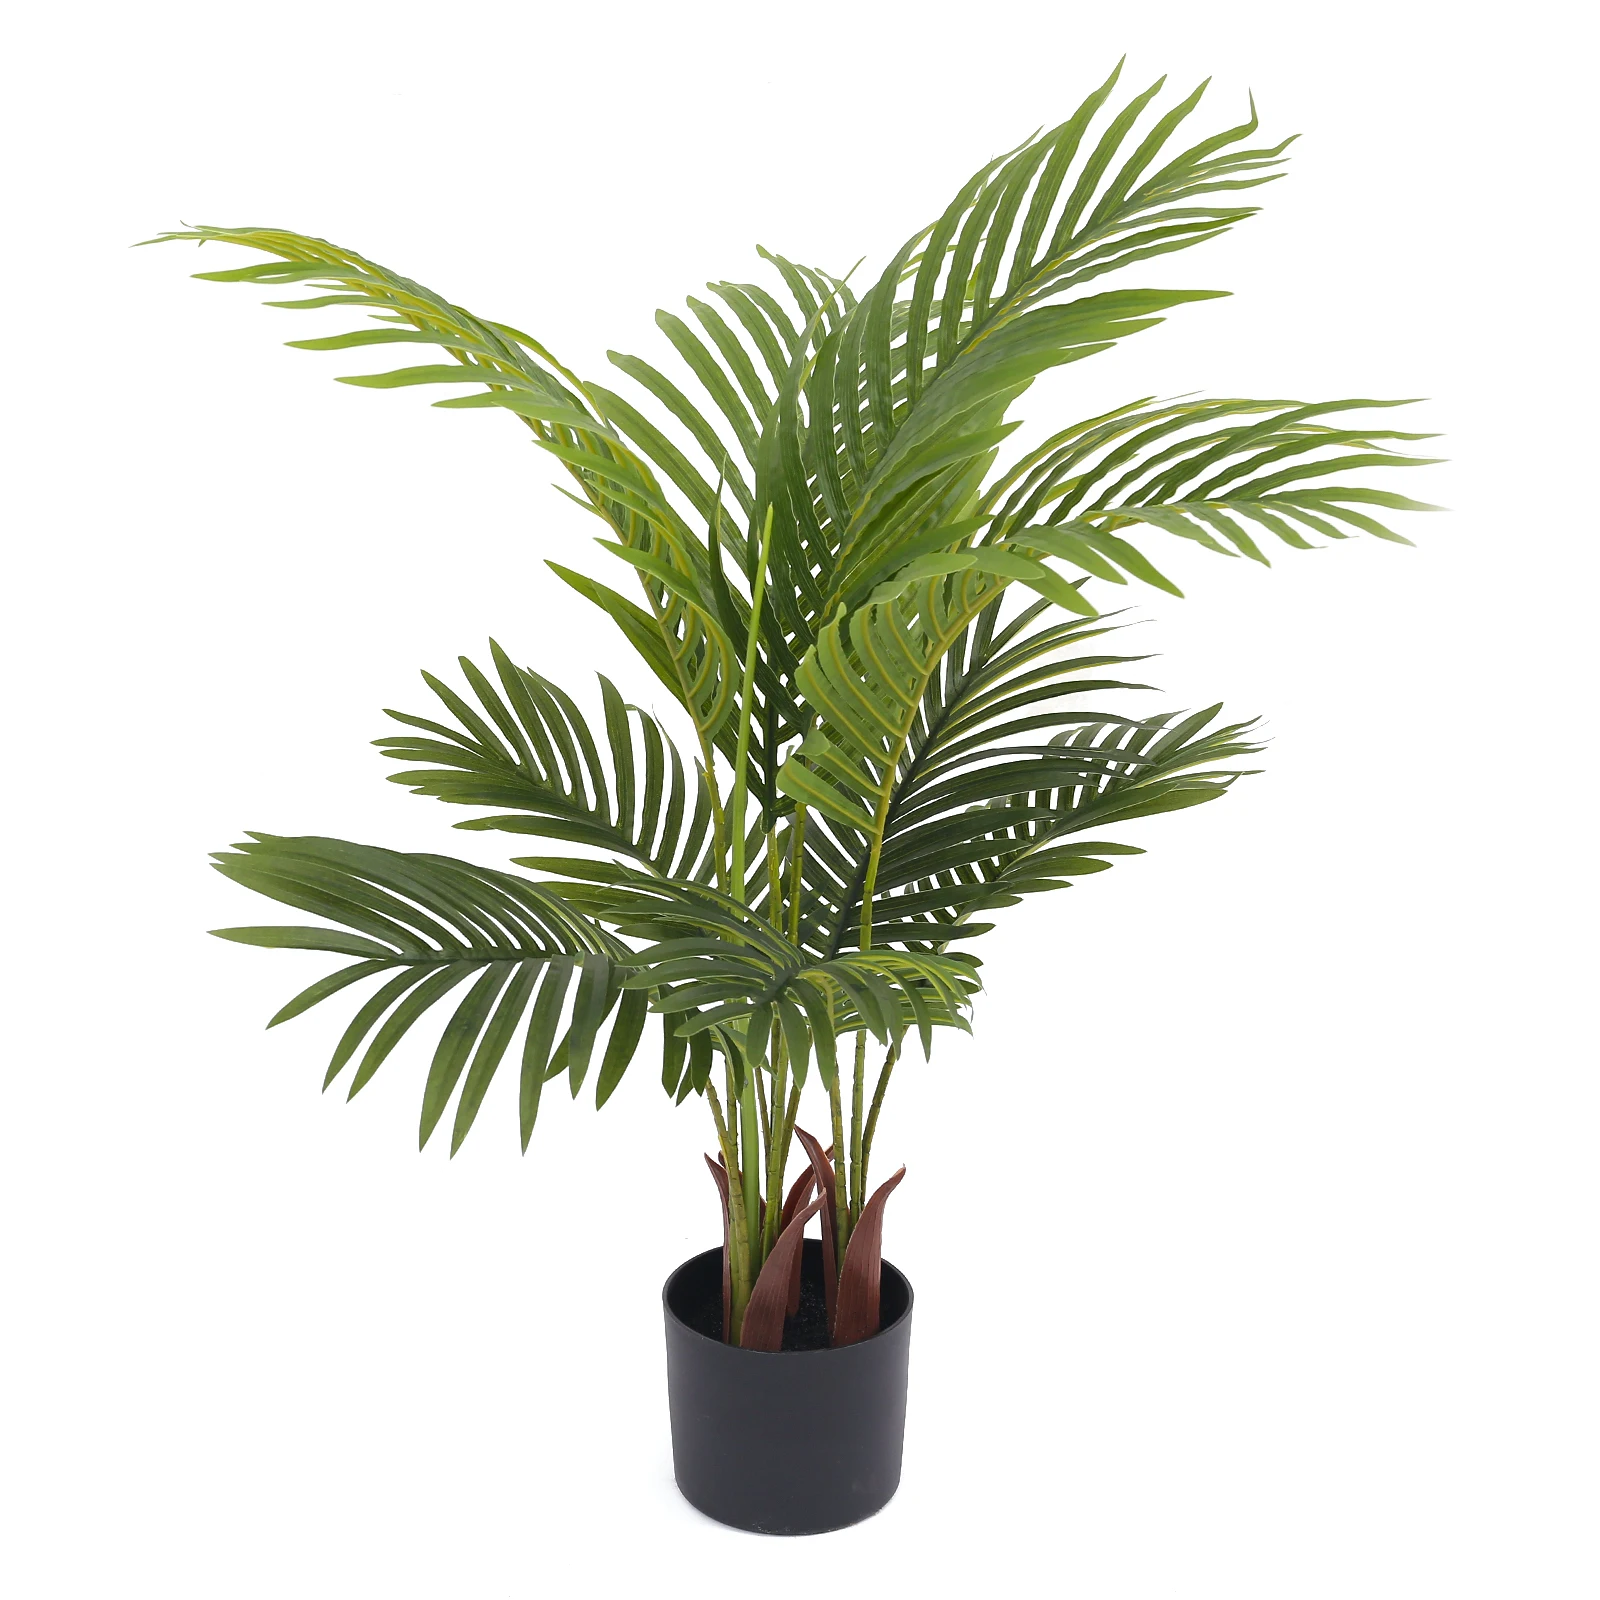 

Wholesale Faux Tropical Plastic Plant Artificial Areca Palm Tree with Pot for Home Office Decor, Shown